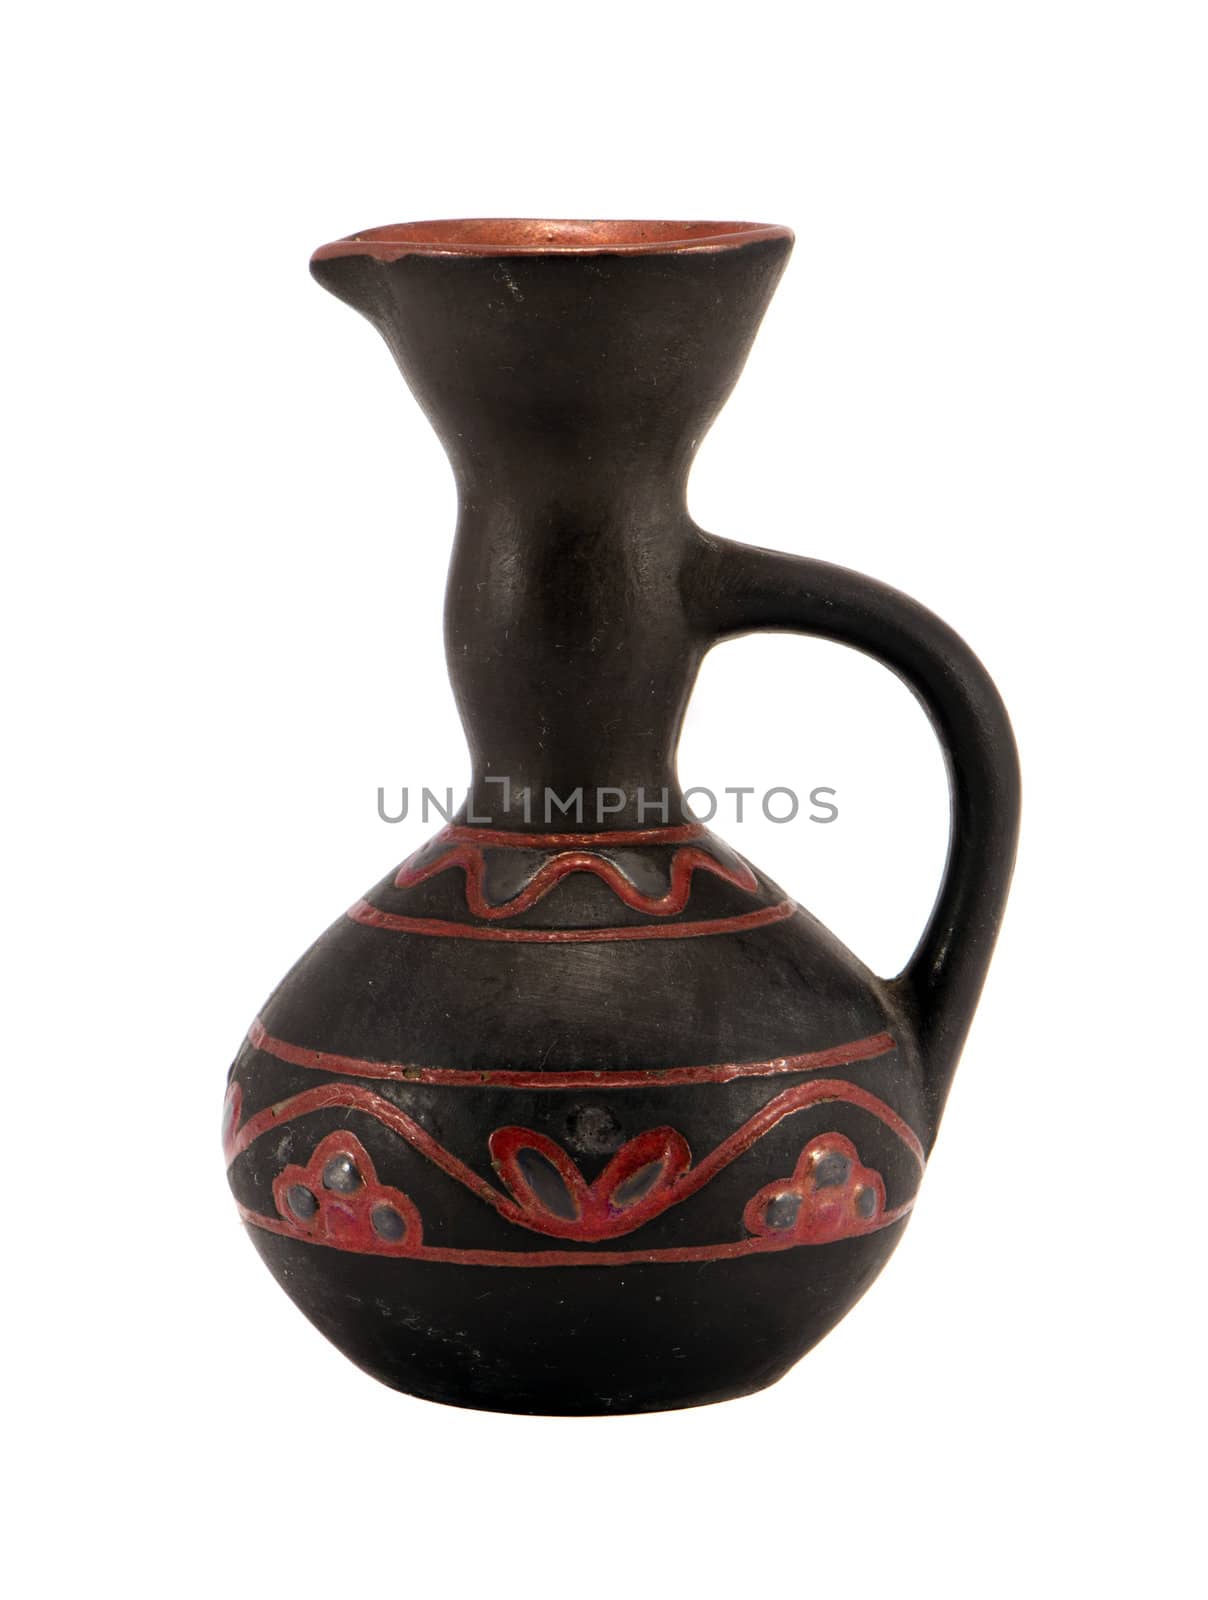 Vintage steel clay pitcher object with handle and ornaments isolated on white background. Home decoration.